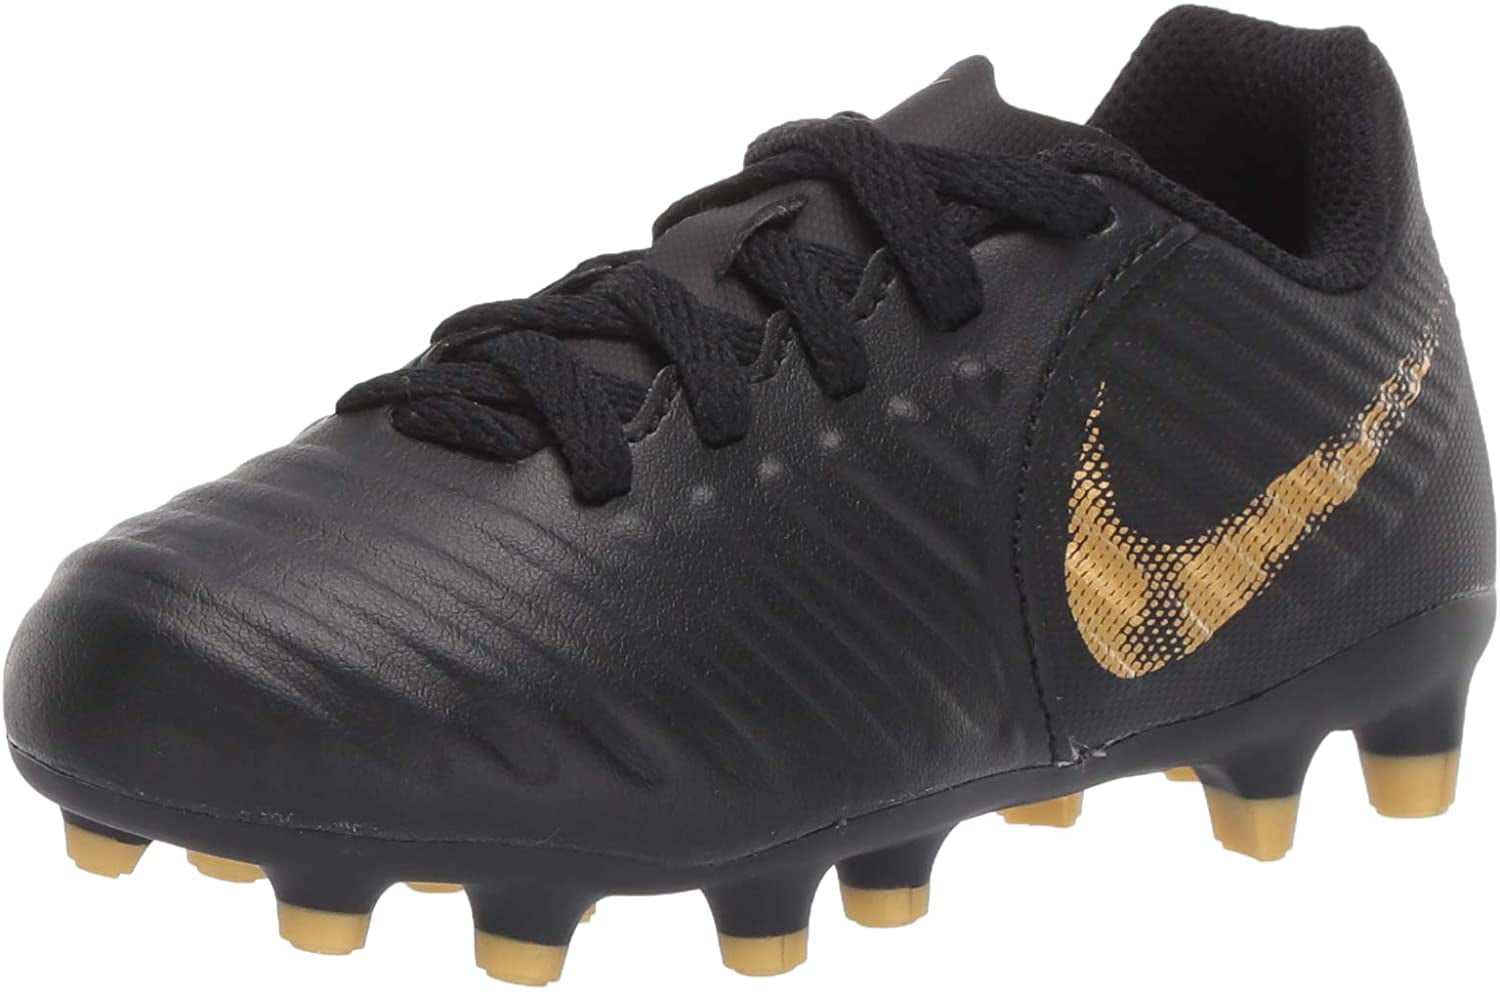 black and gold youth soccer cleats